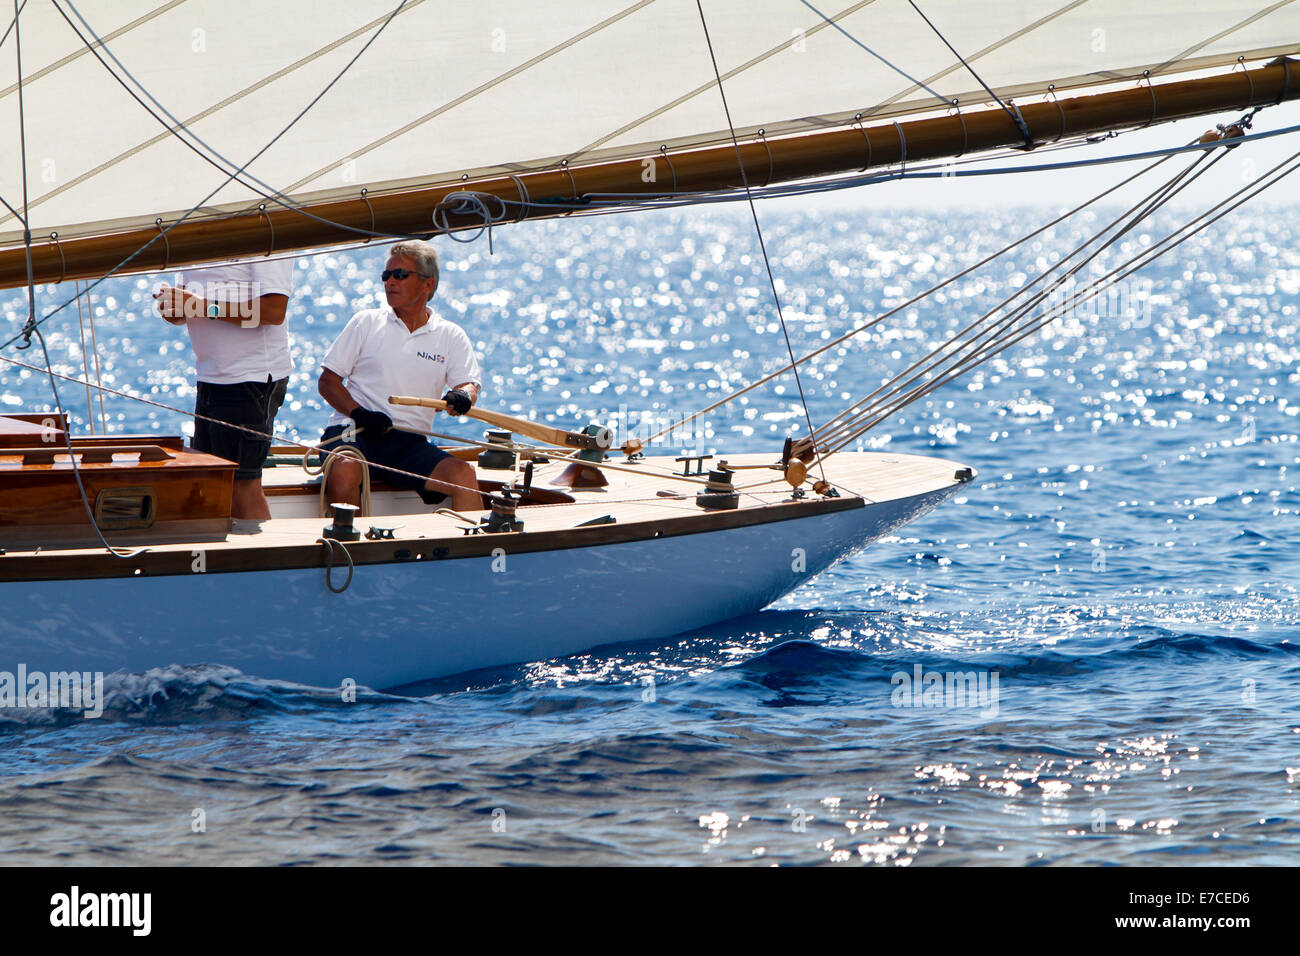 Imperia, Italy. 13th September 2014. A crew memeber at the helm during Vele d'Epoca classic yachts regatta, a vintage yachts competition held every two years in Imperia, Italy. Stock Photo